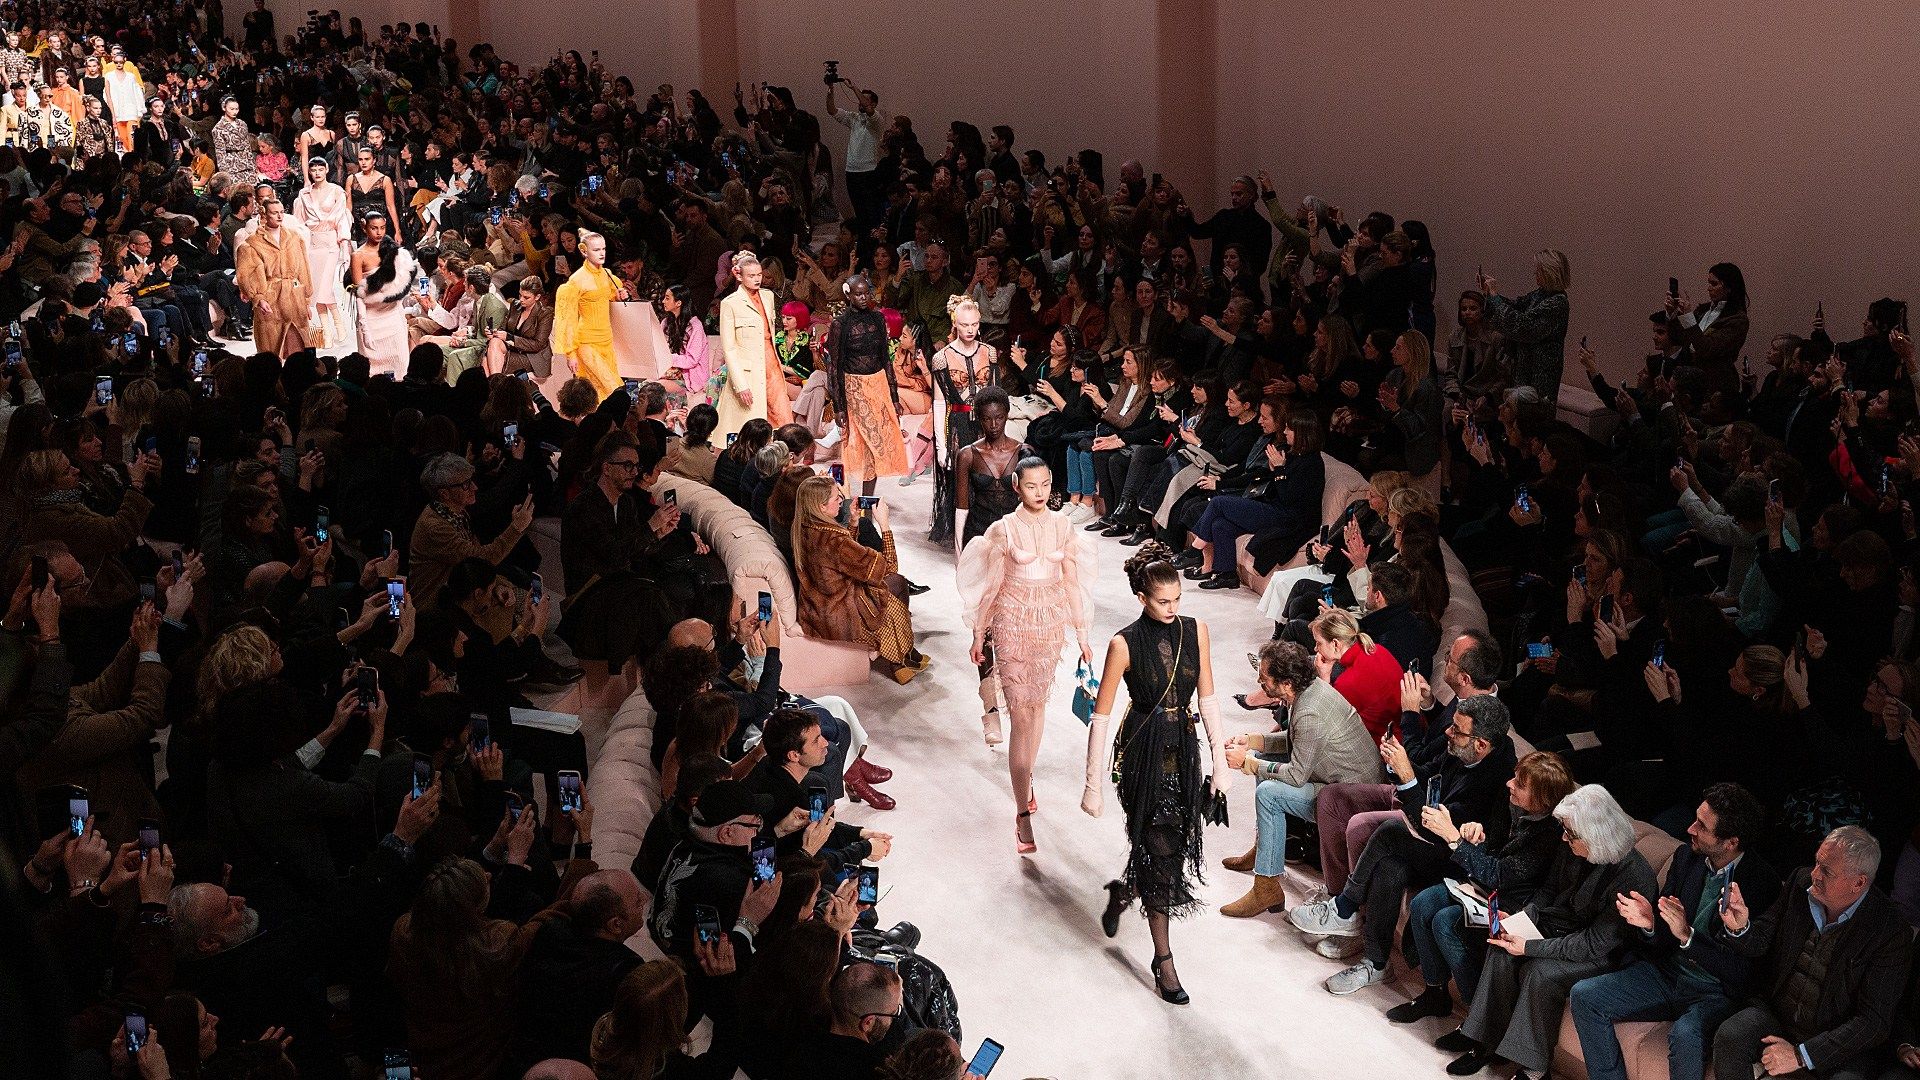 Milan Fashion Week Returns With IRL Shows and Presentations – WWD